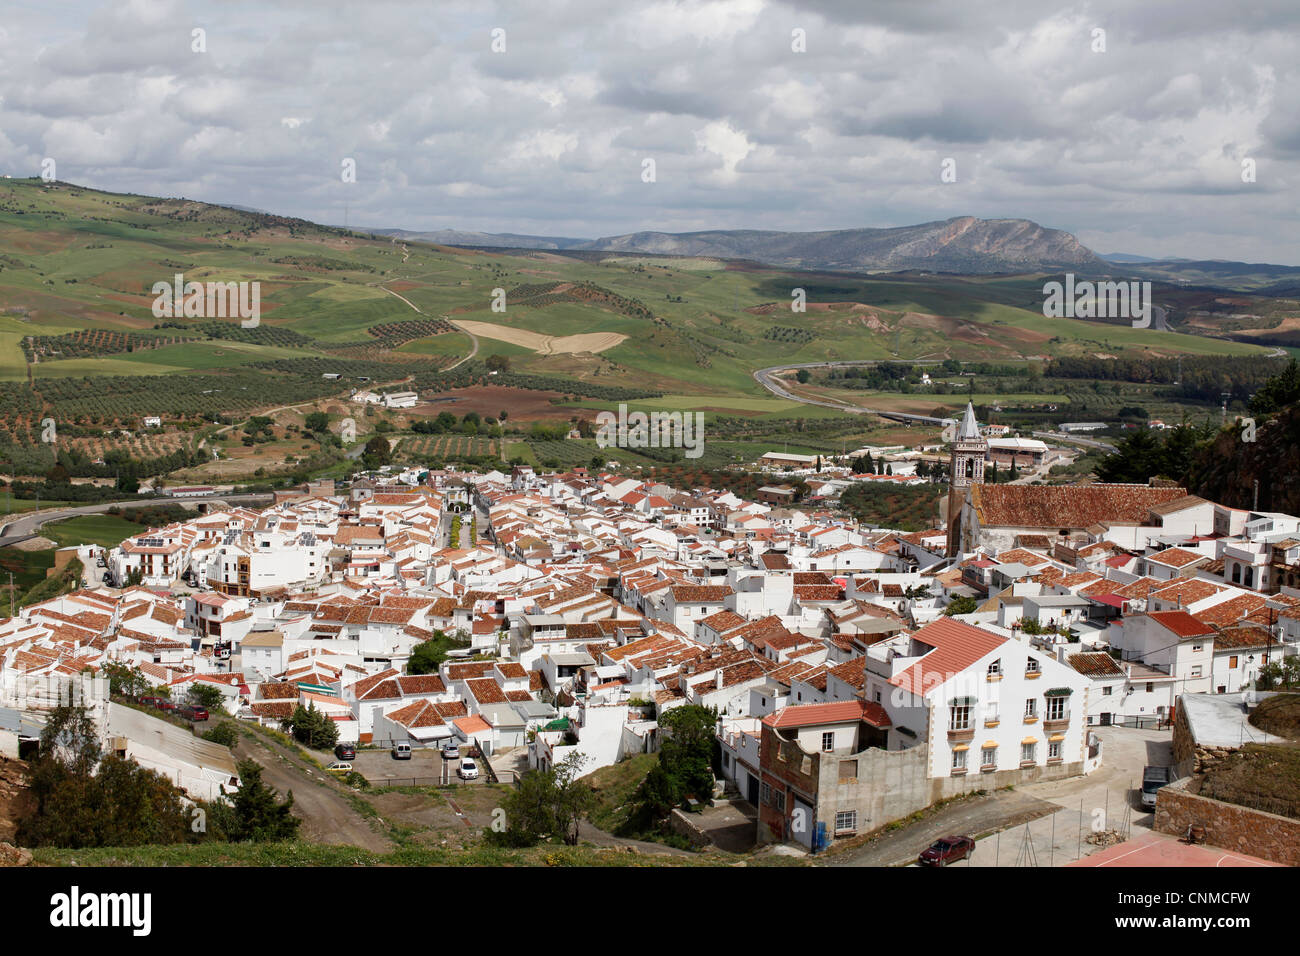 Ardales village, Andalusia, Spagna, Europa Foto Stock